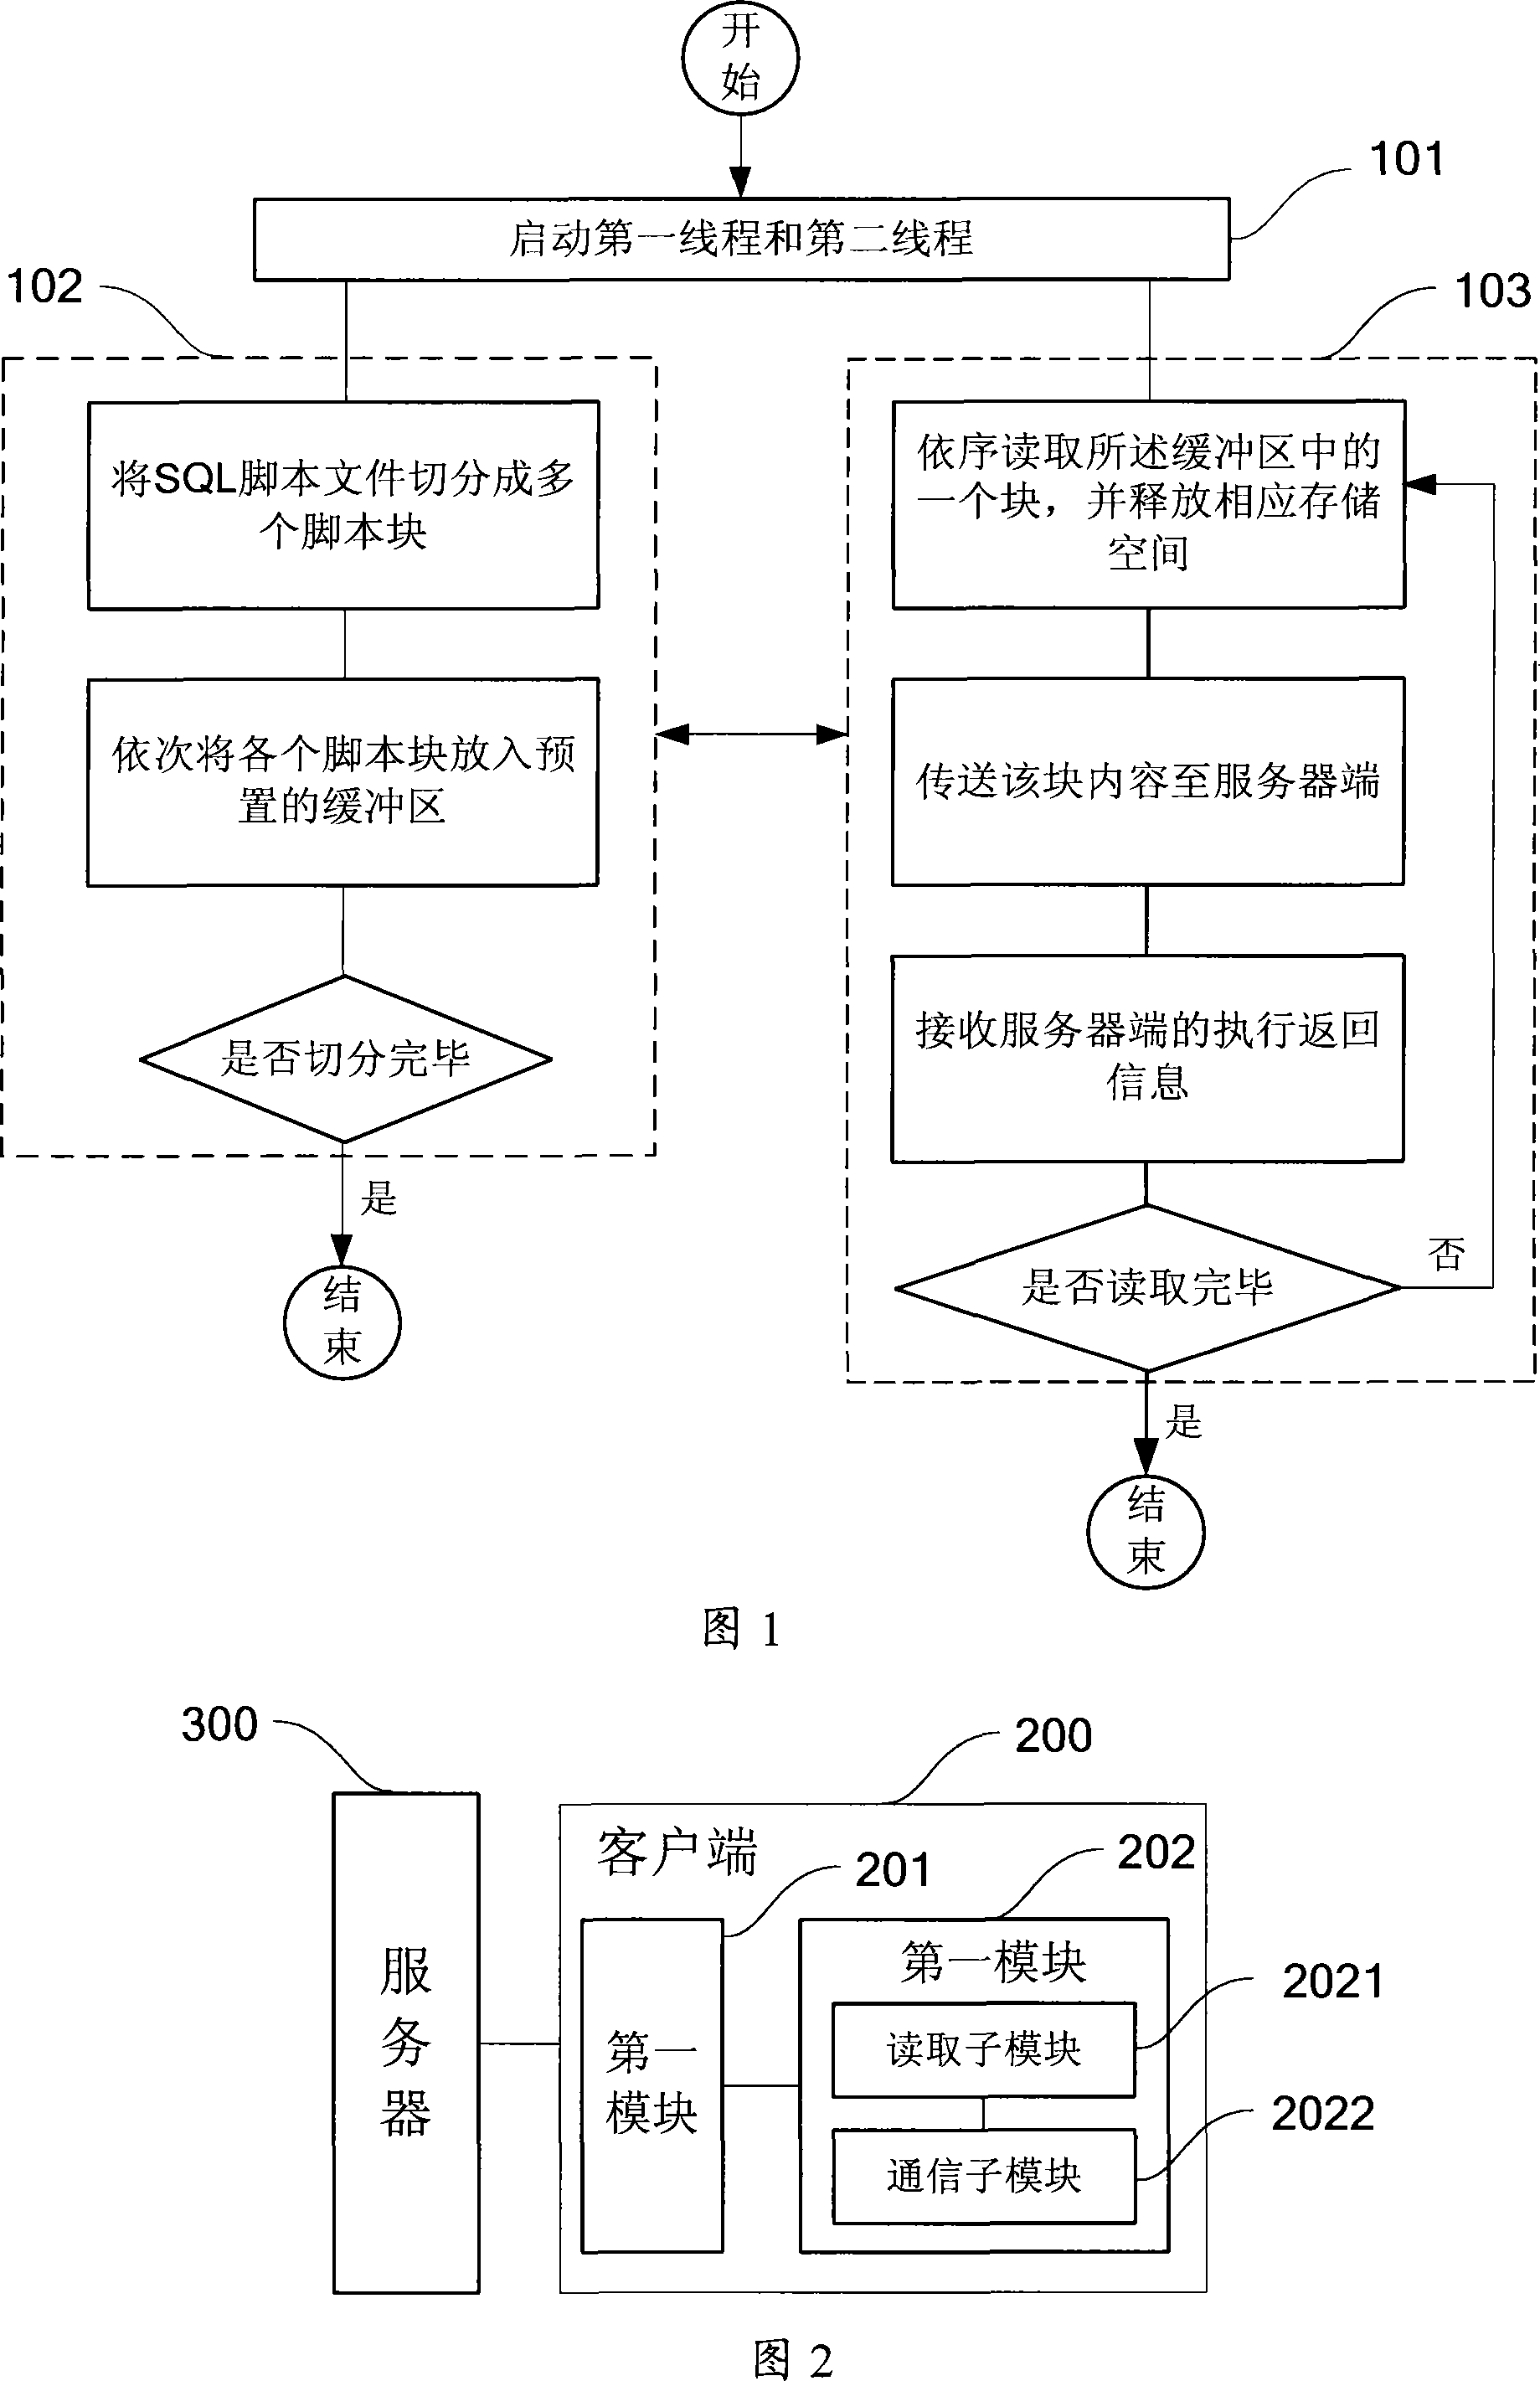 Method and device for executing SQL script file in distributed system